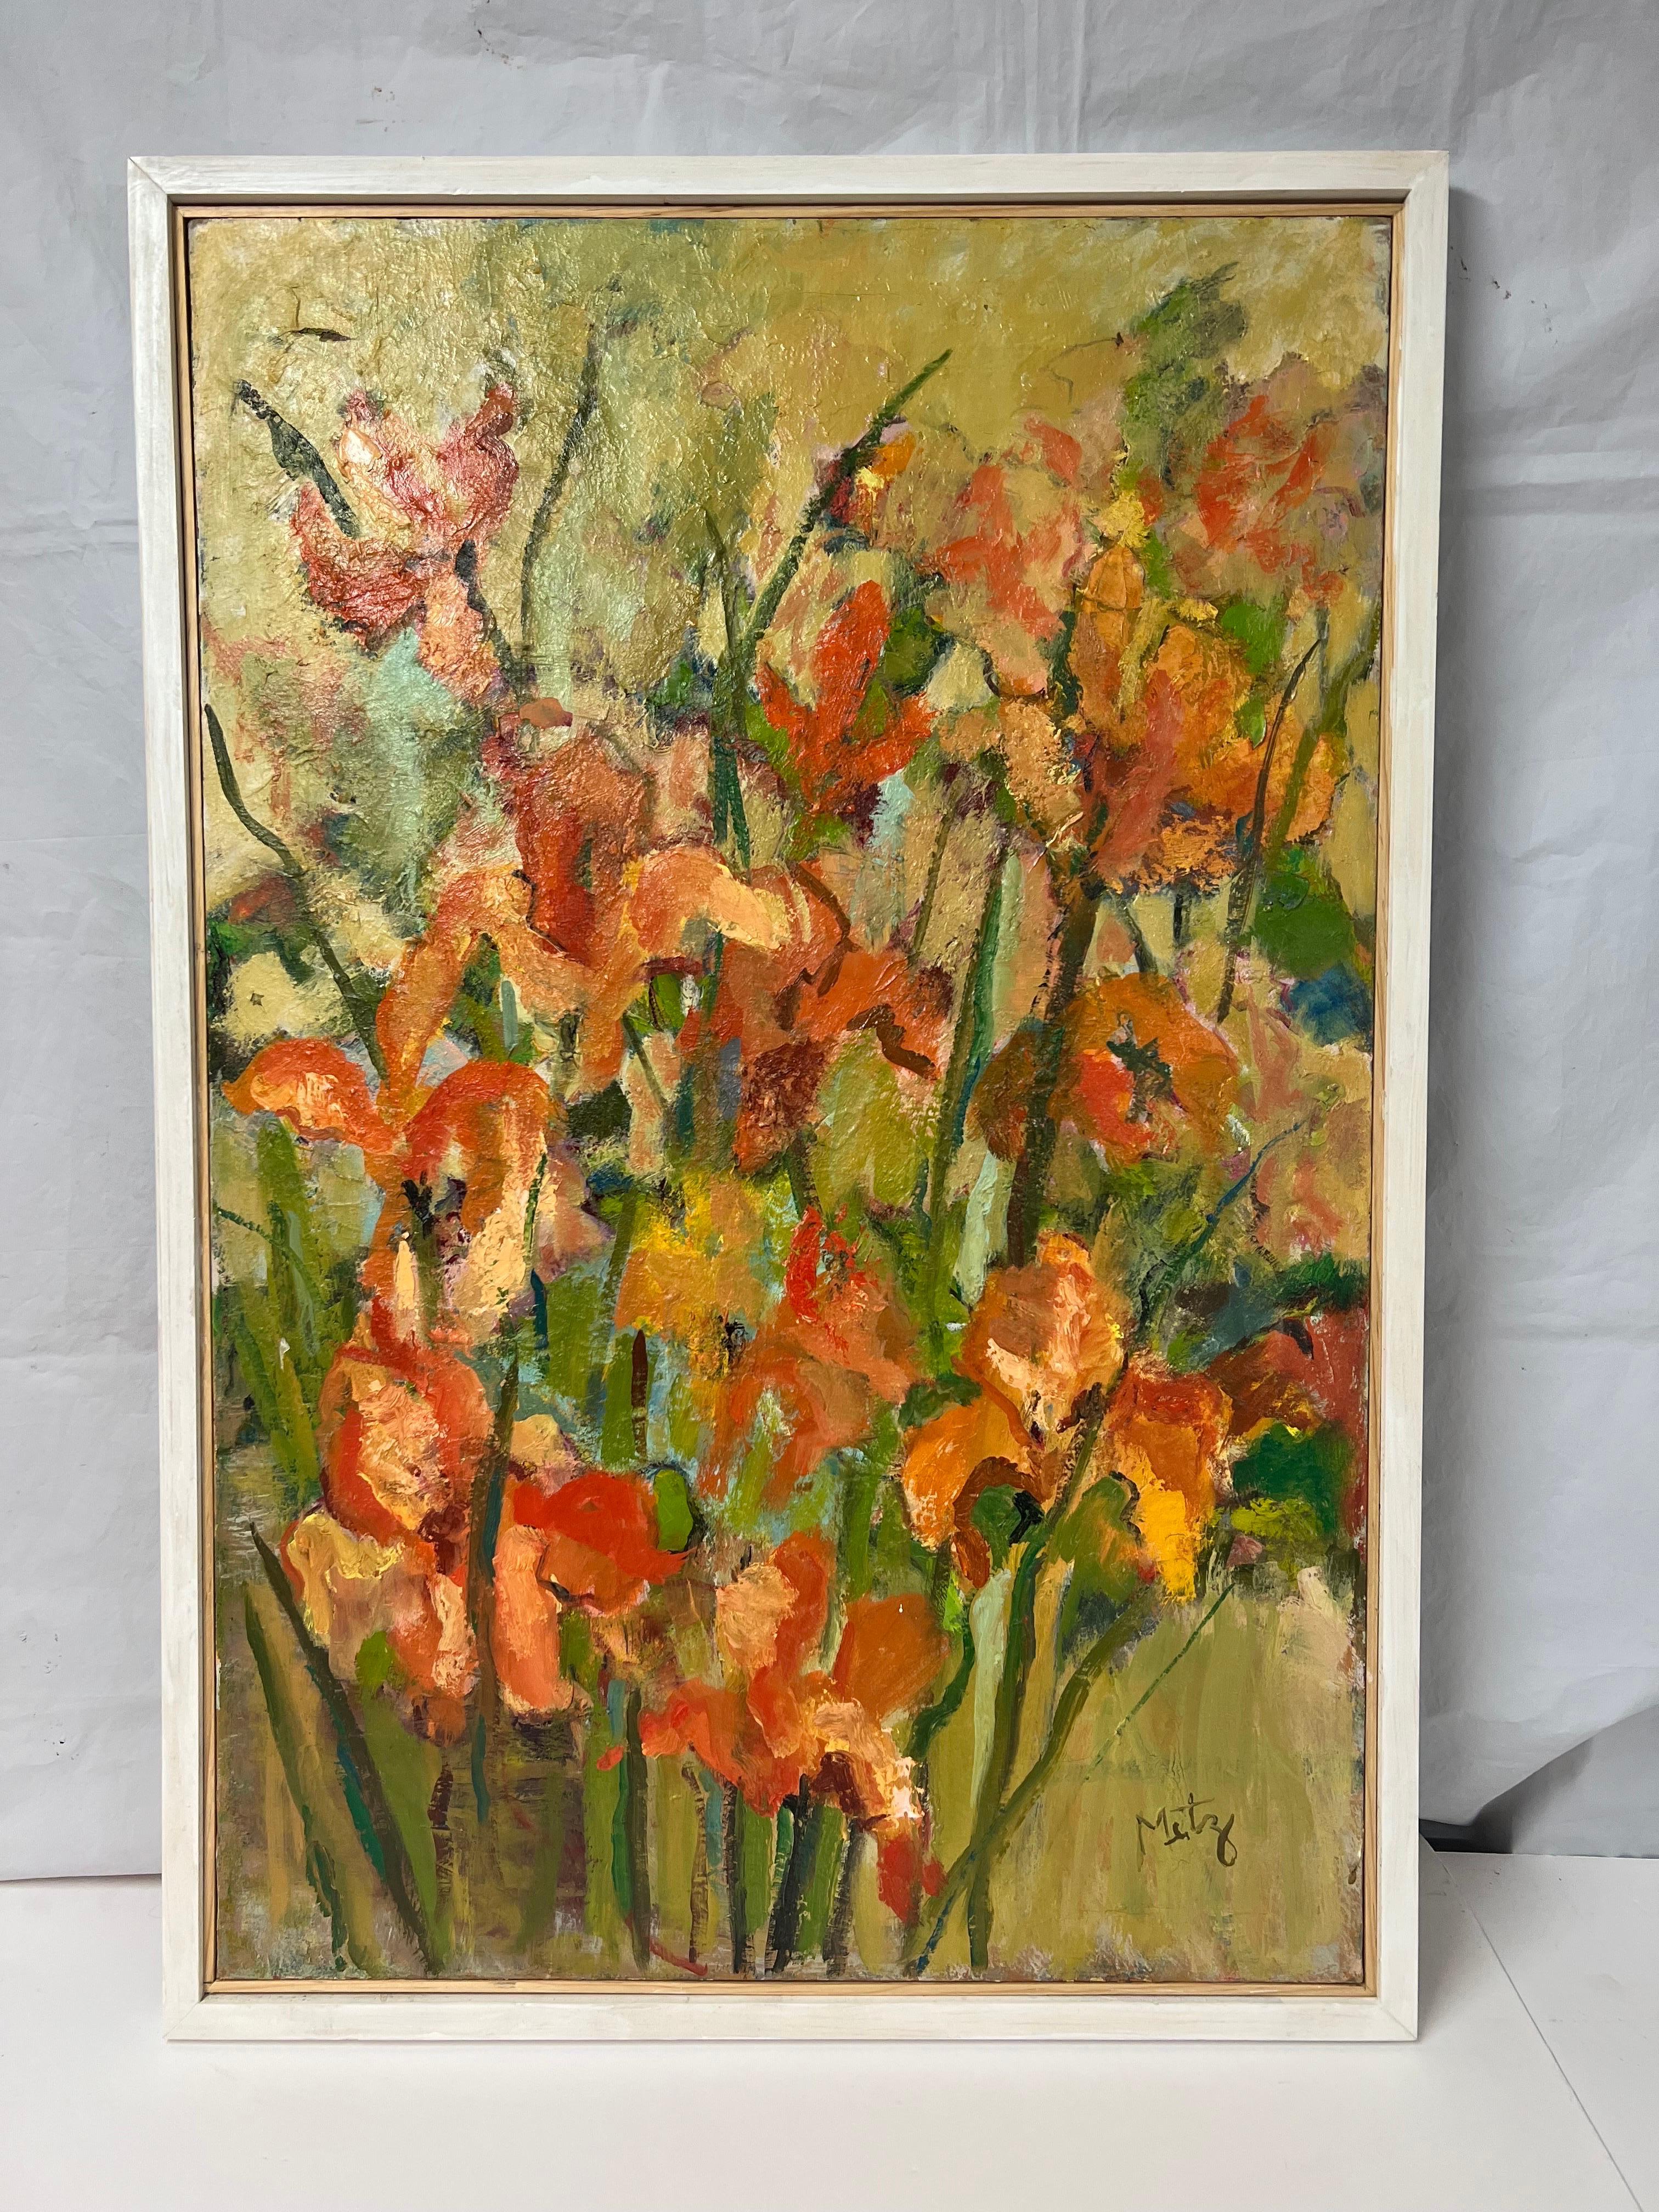 Large Mid Century Still Life of Flowers Signed Metz. Framed in a plain white wooden frame. The colorful Impasto composition consists of Large Pinkish Orange gladiolas. This vibrant and cheery painting will brighten any room. 